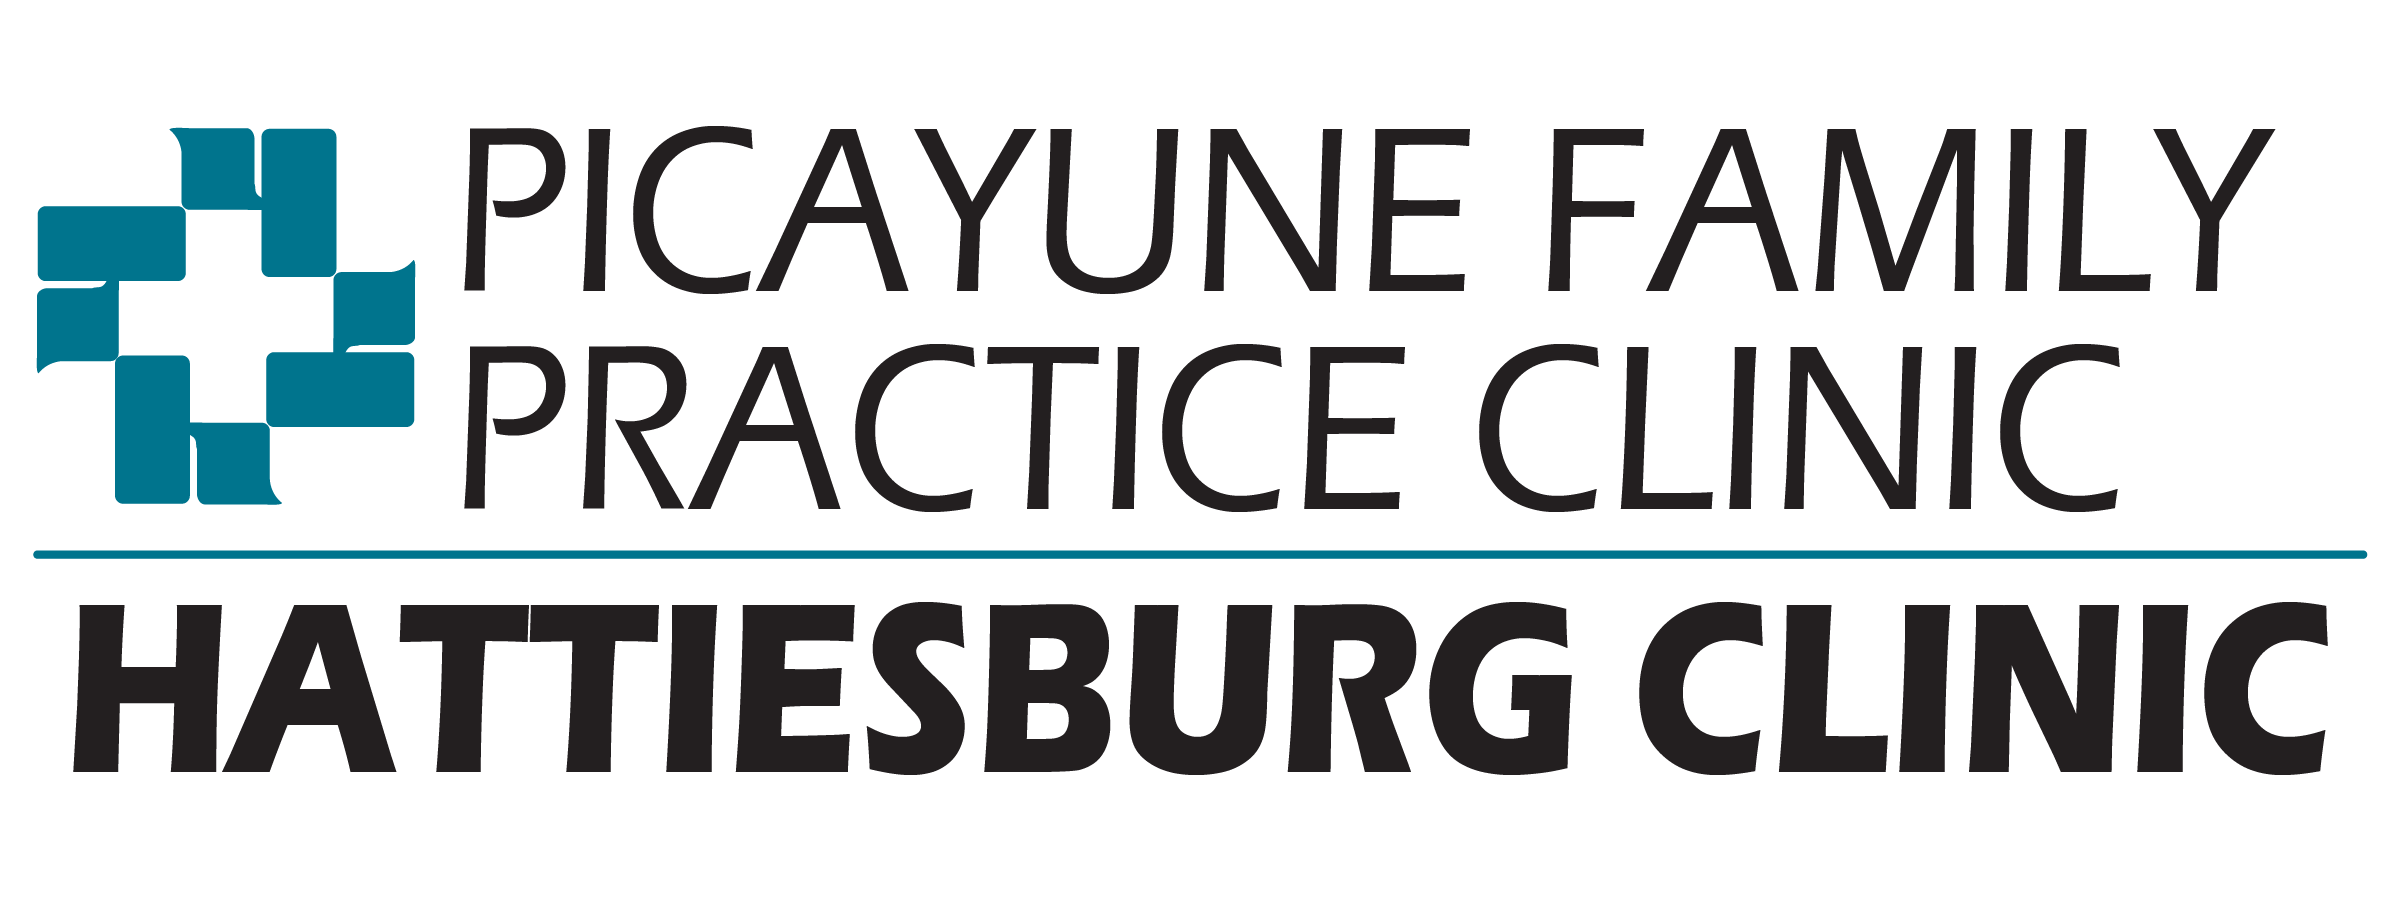 Picayune Family Practice Clinic logo